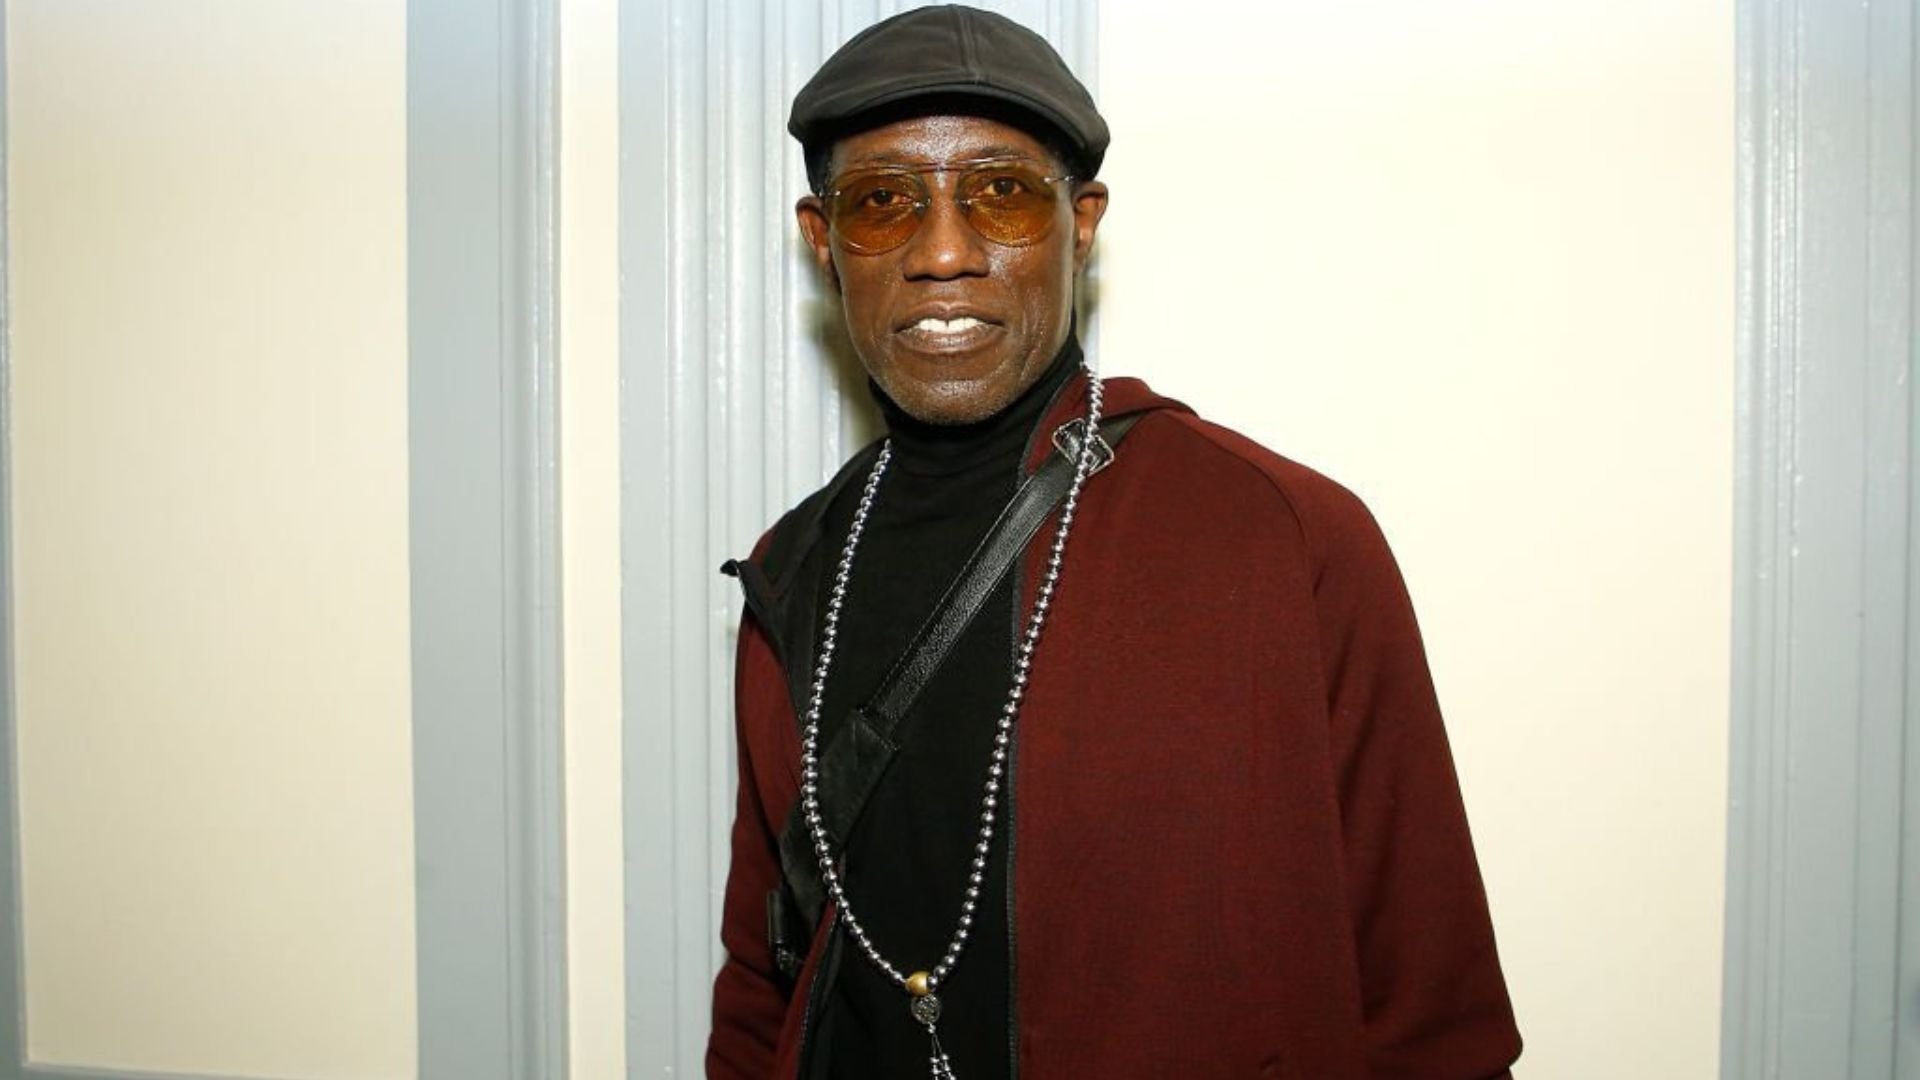 Wesley Snipes Weight Loss [REVEALED]